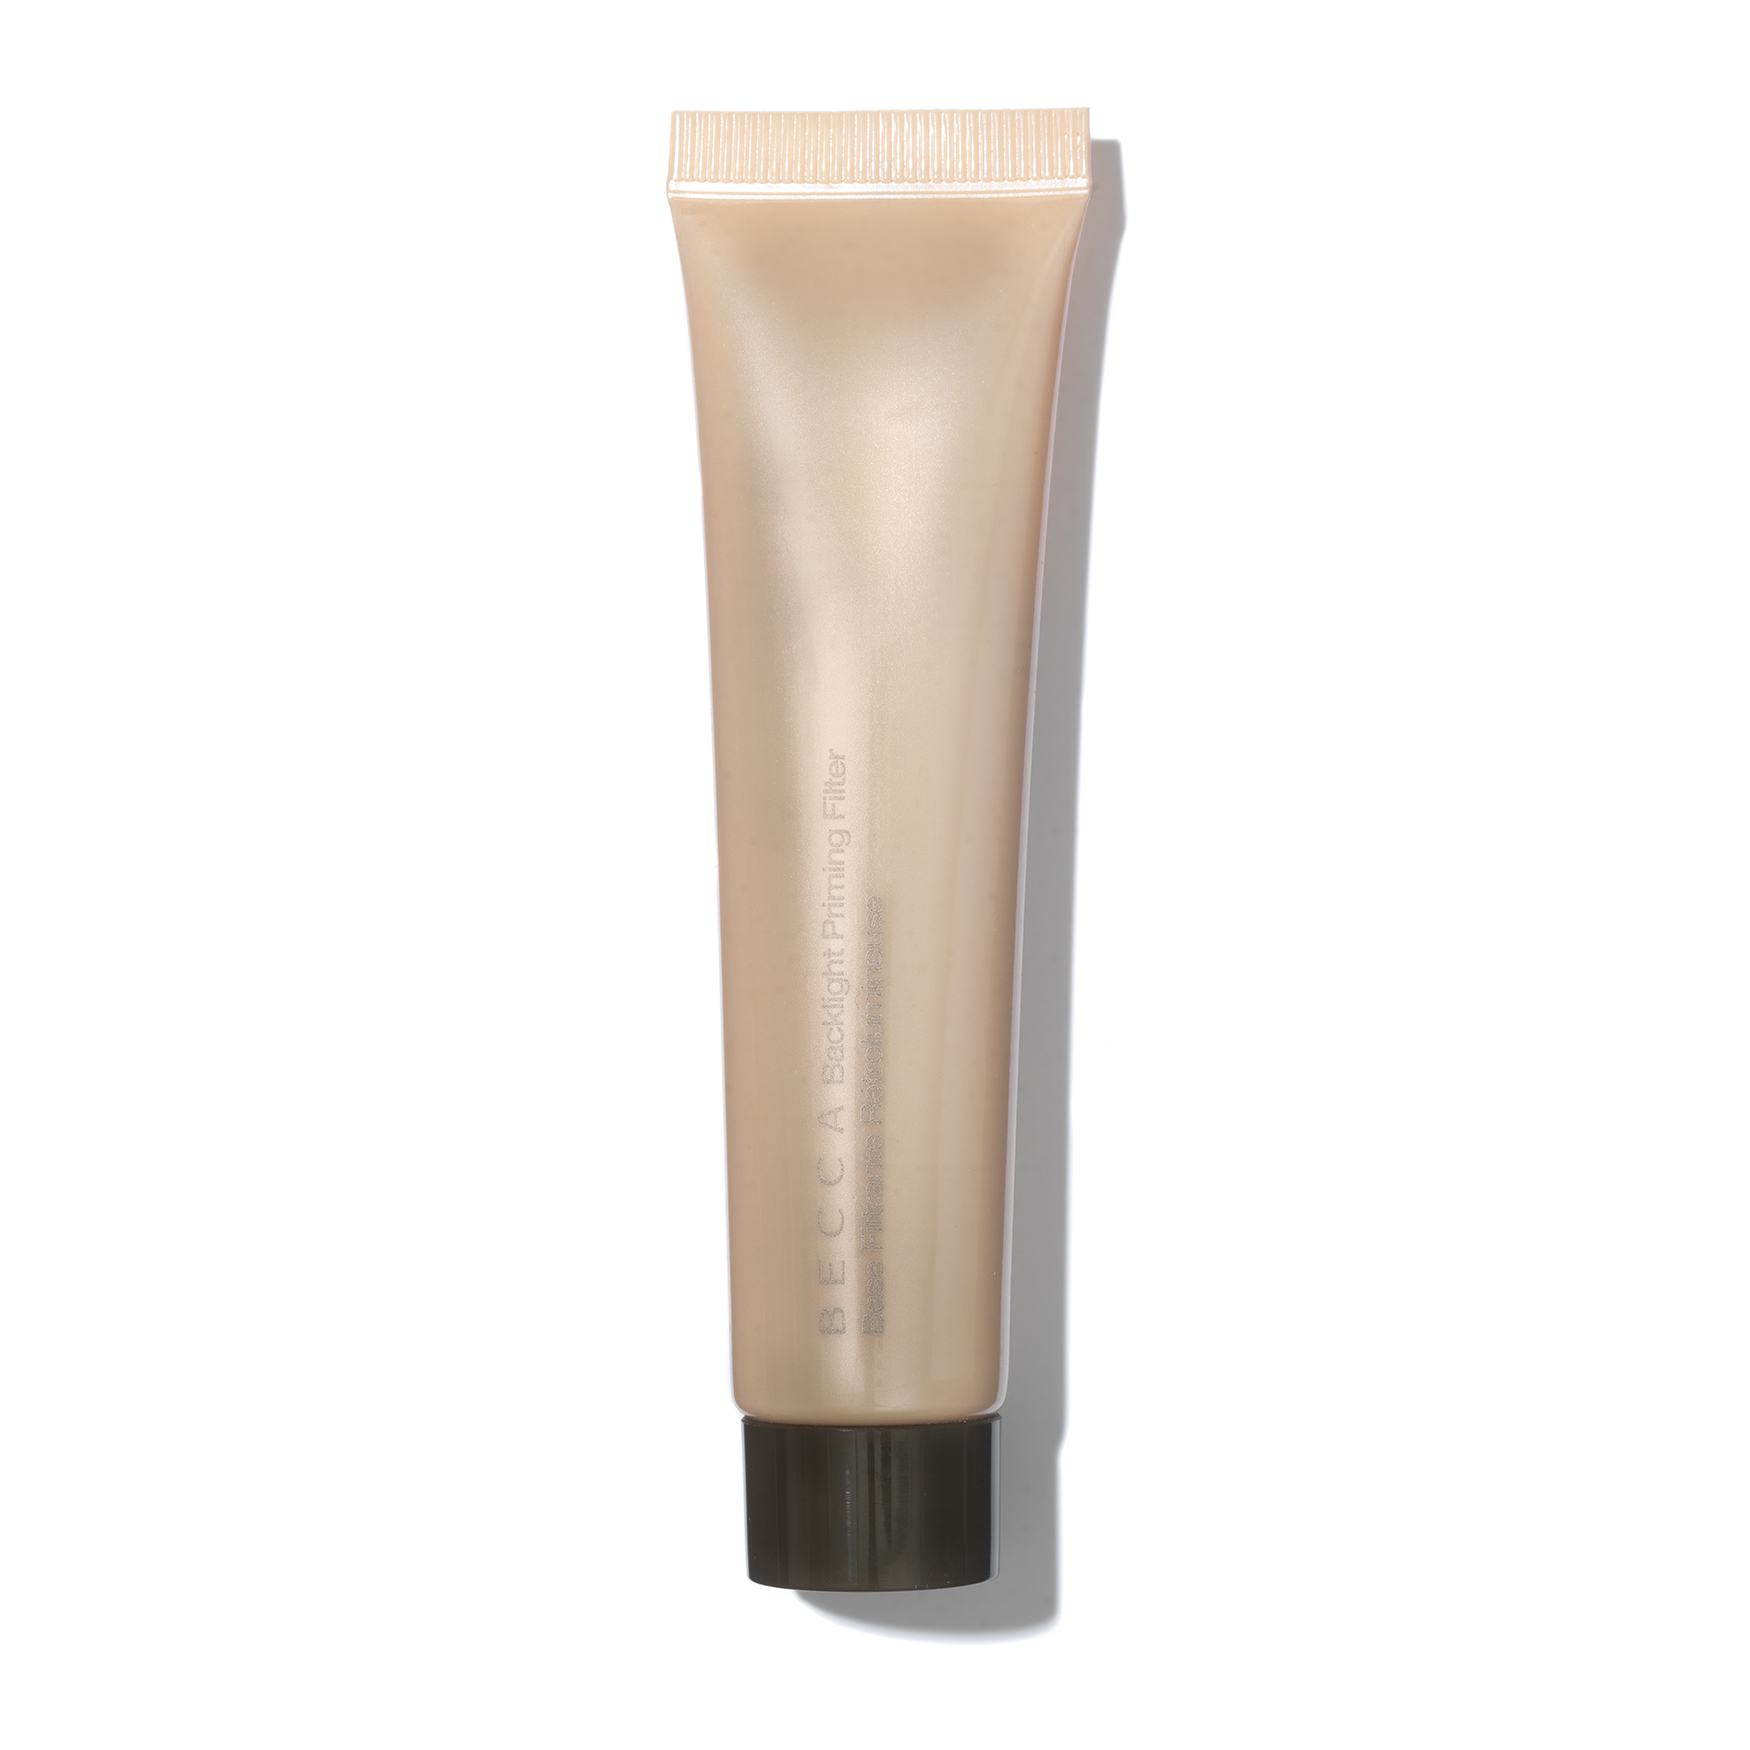 Becca Backlight Priming Filter helps to create a blank canvas for makeup by...